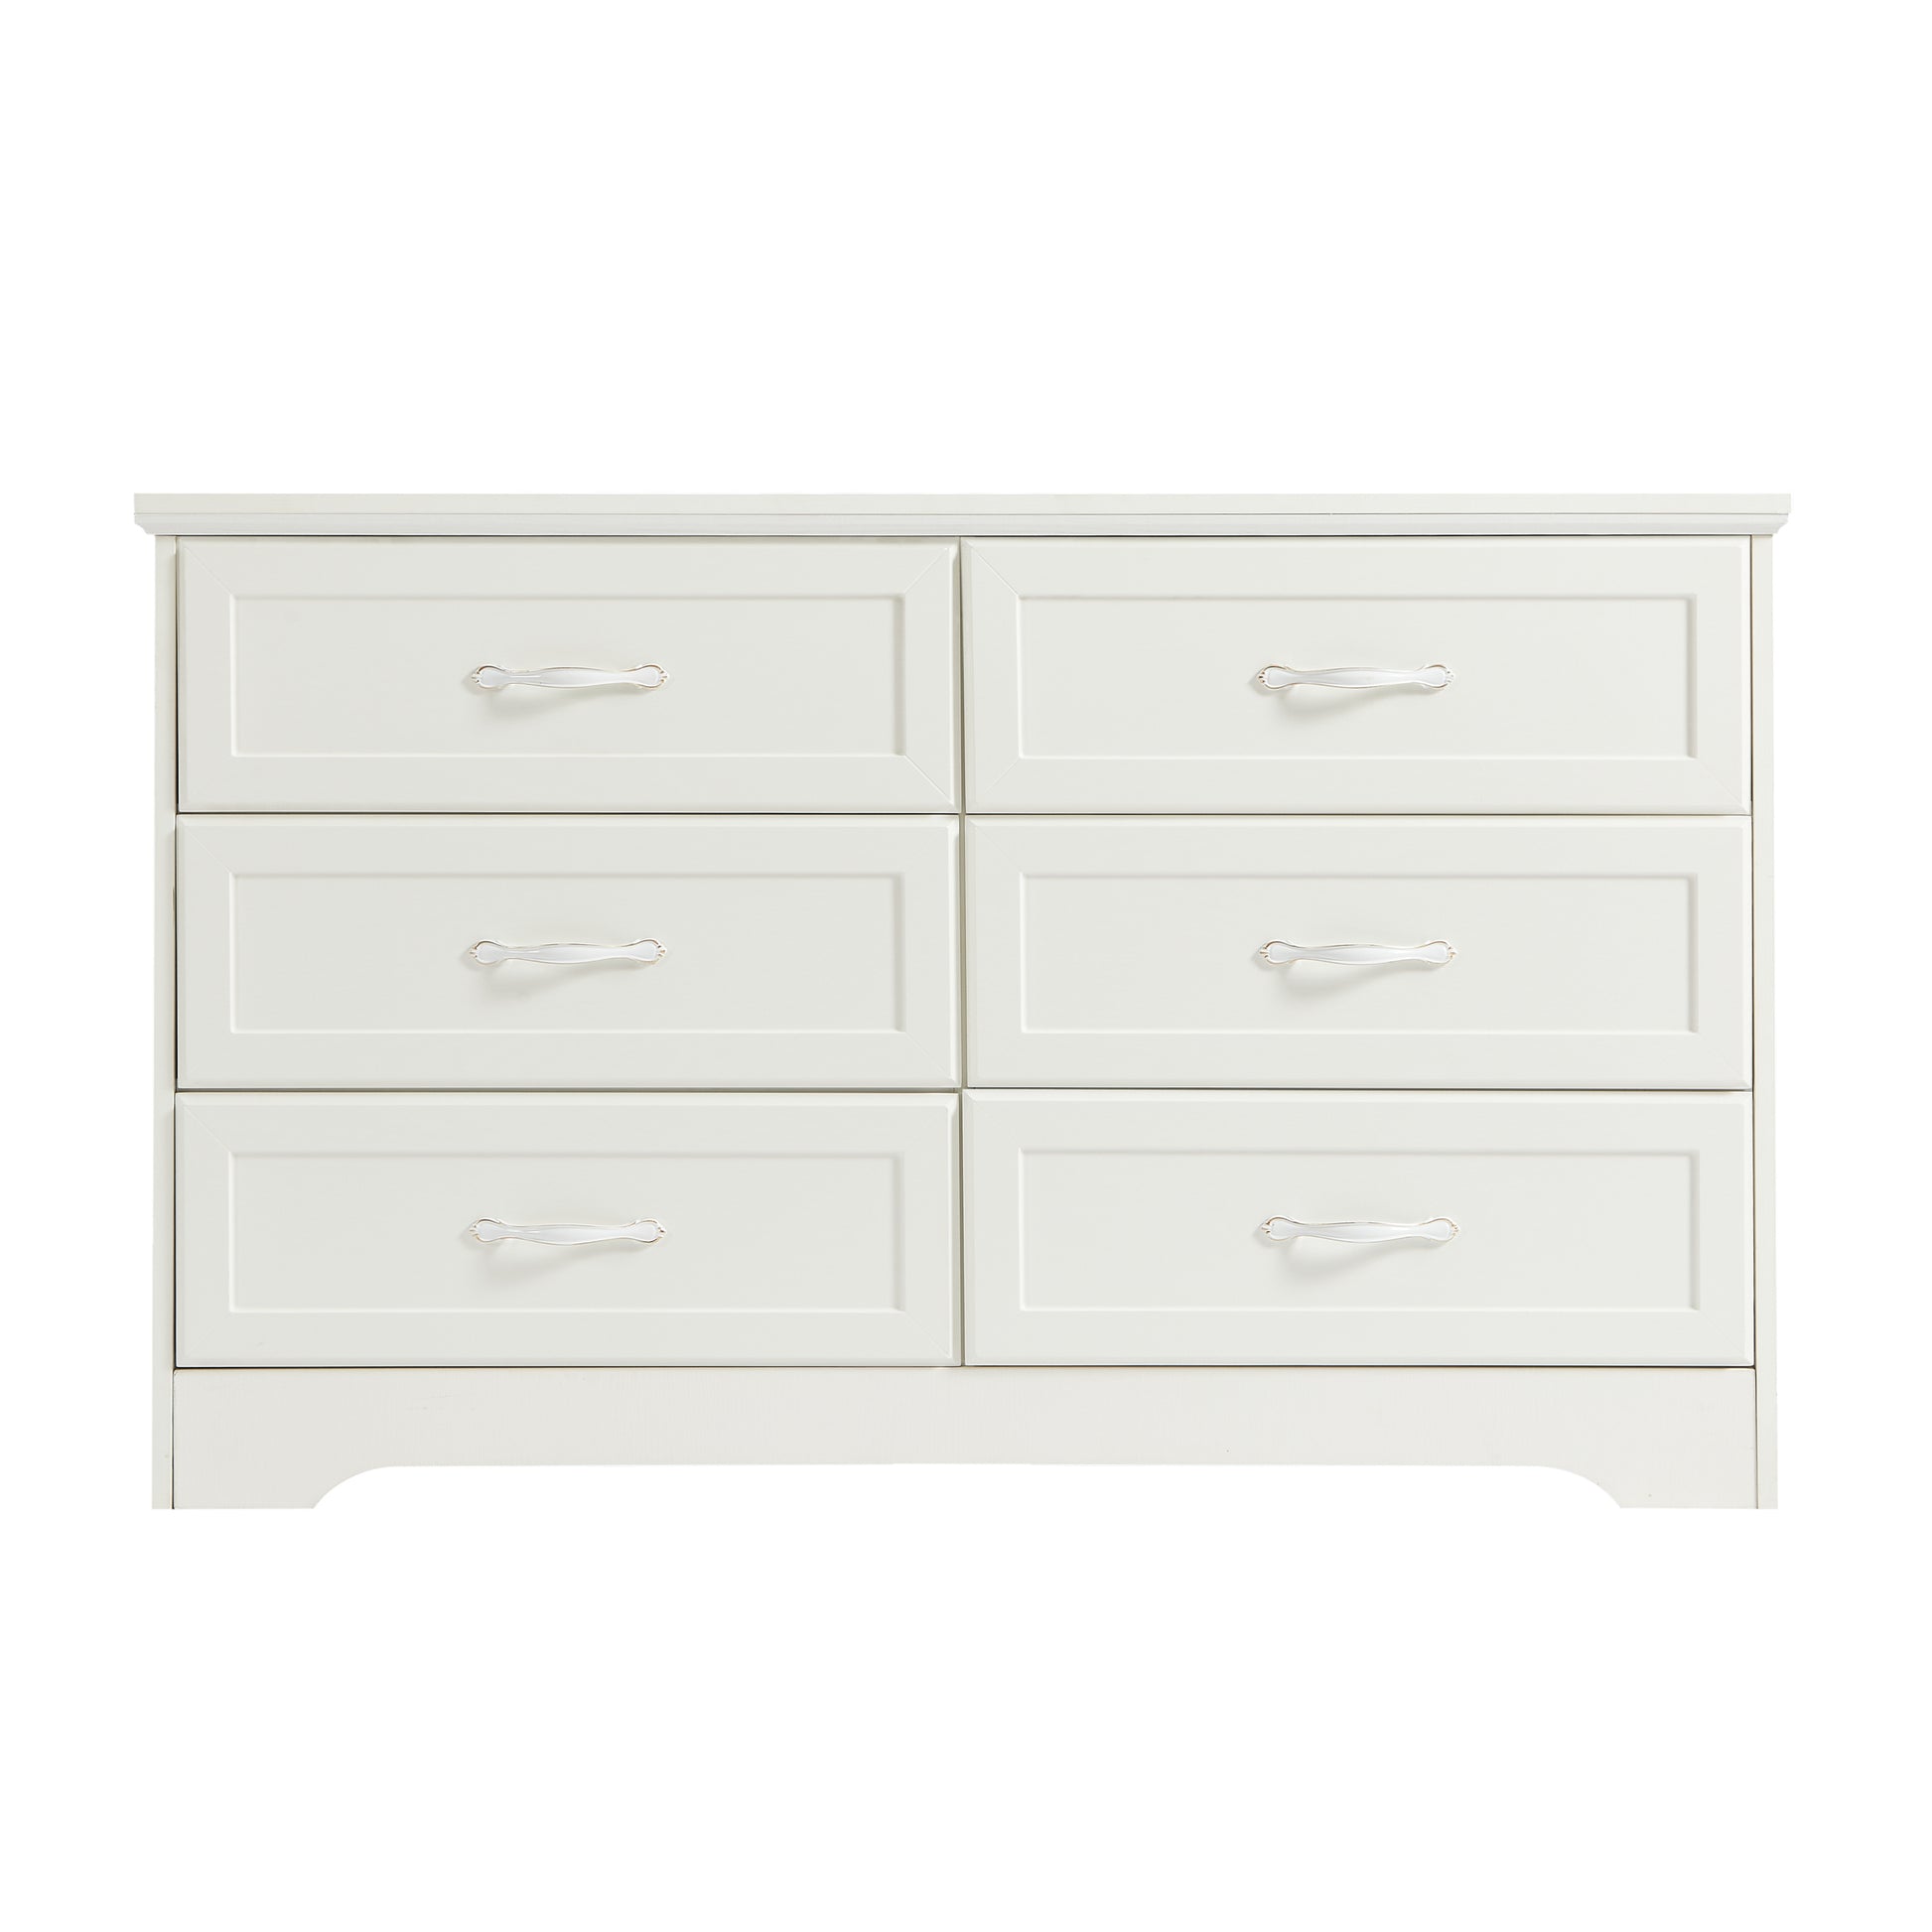 Modern 3 Drawer Bedroom Chest Of Drawers With 6 -